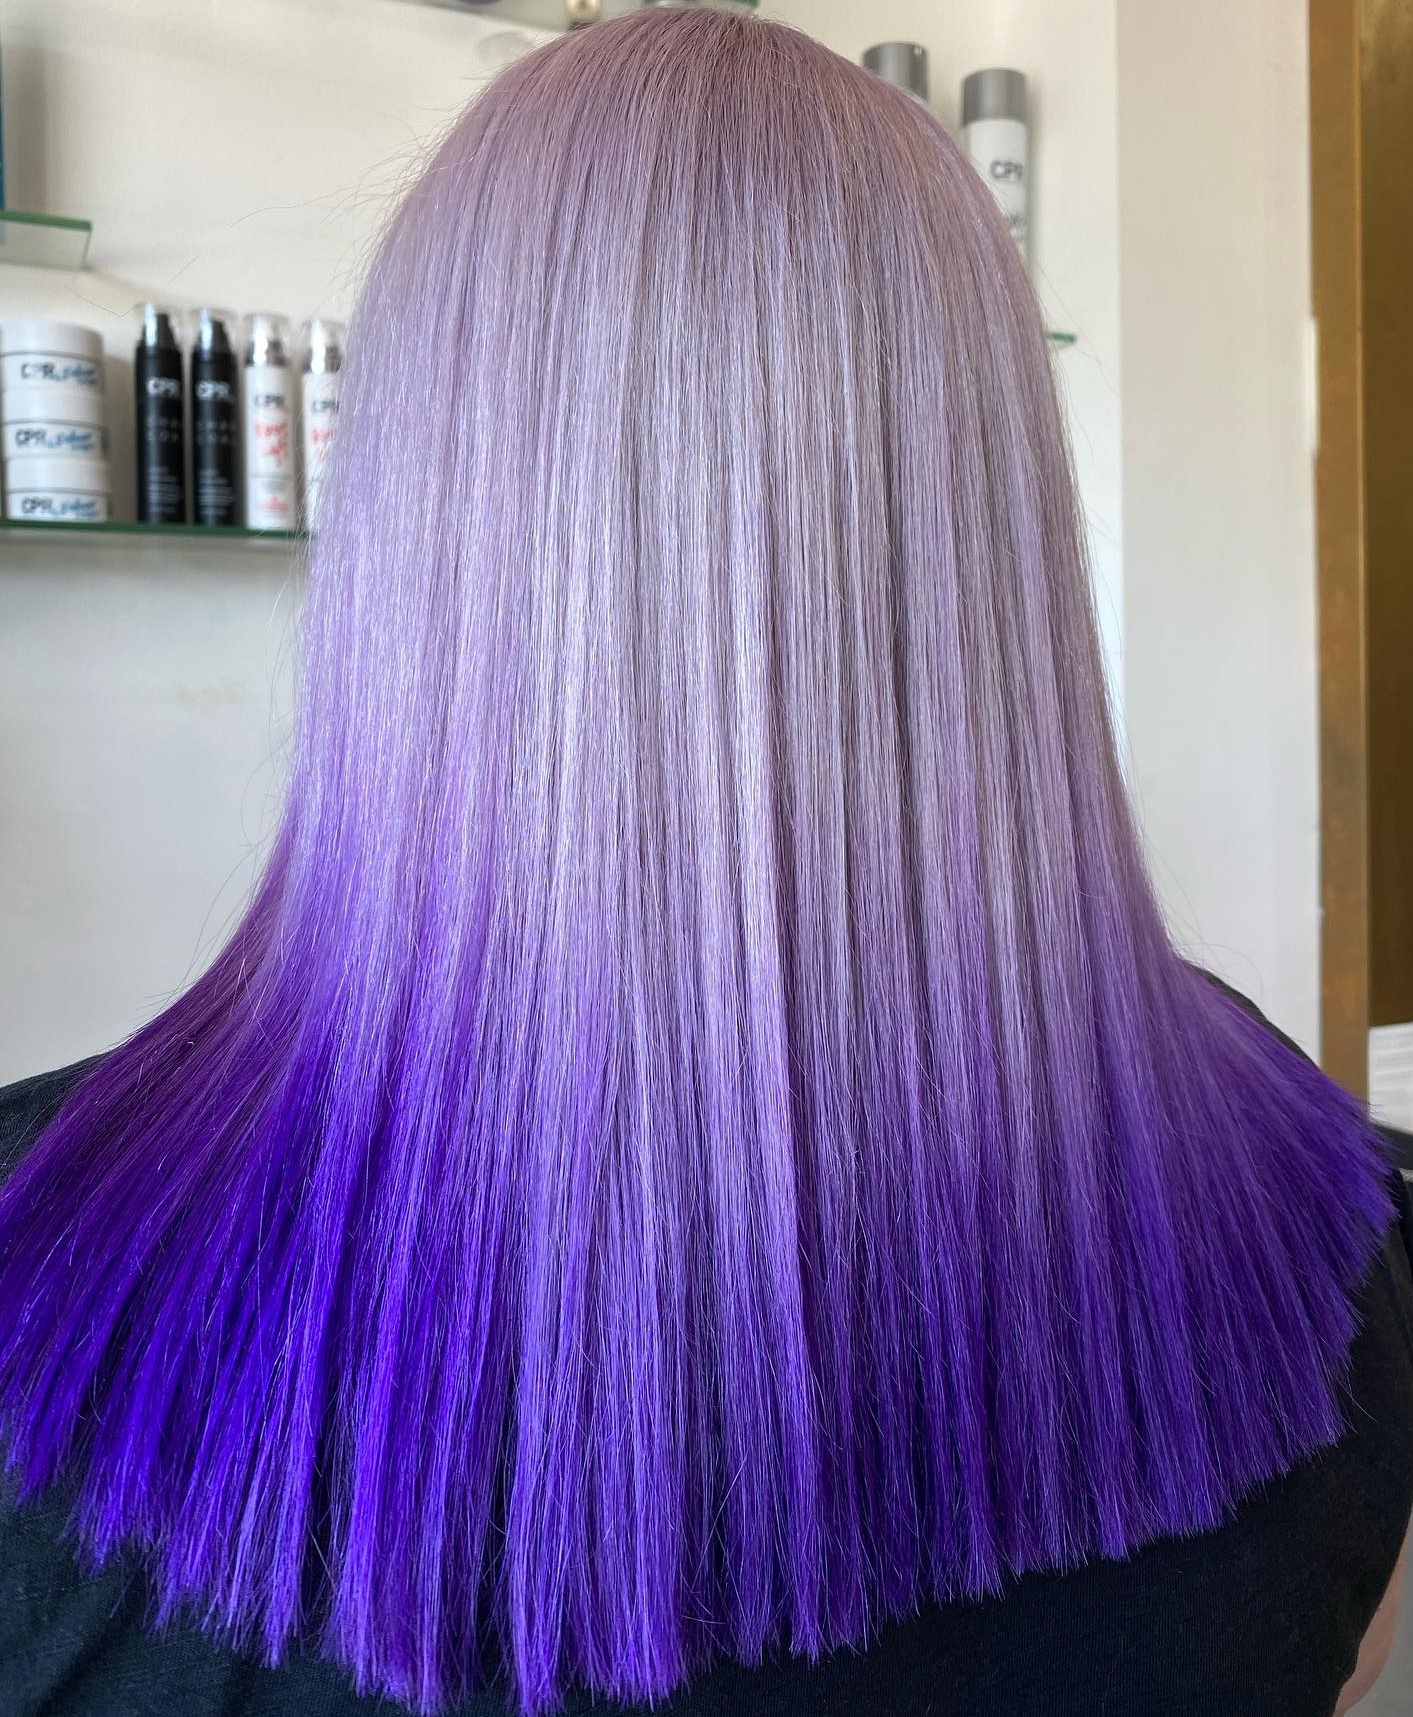 Long Blonde-to-Dark Purple Ombre Hair Color